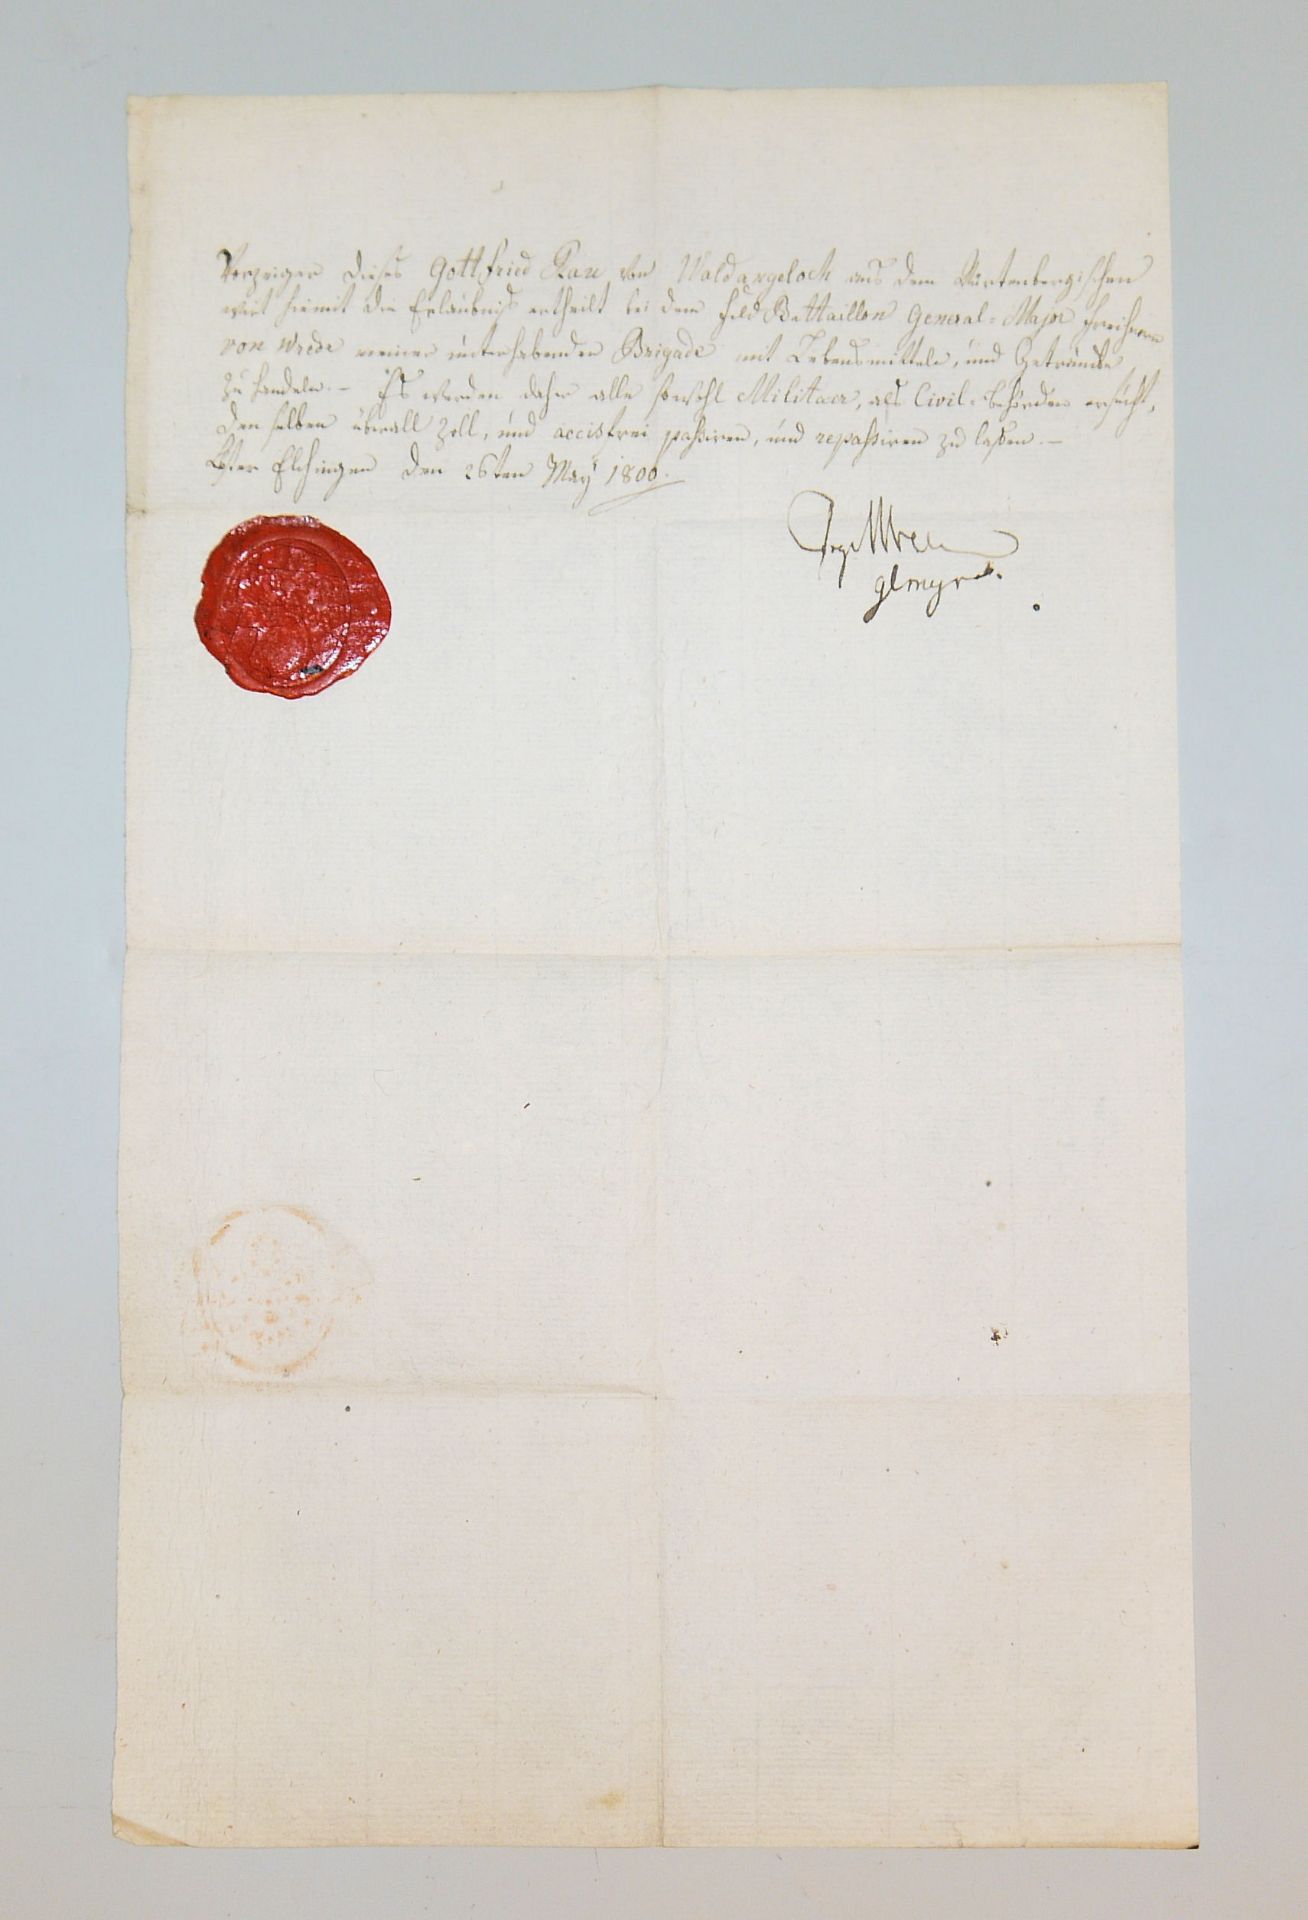 Passing licence, autograph of Prince von Wrede, 1800, with shellac seal - Image 2 of 2